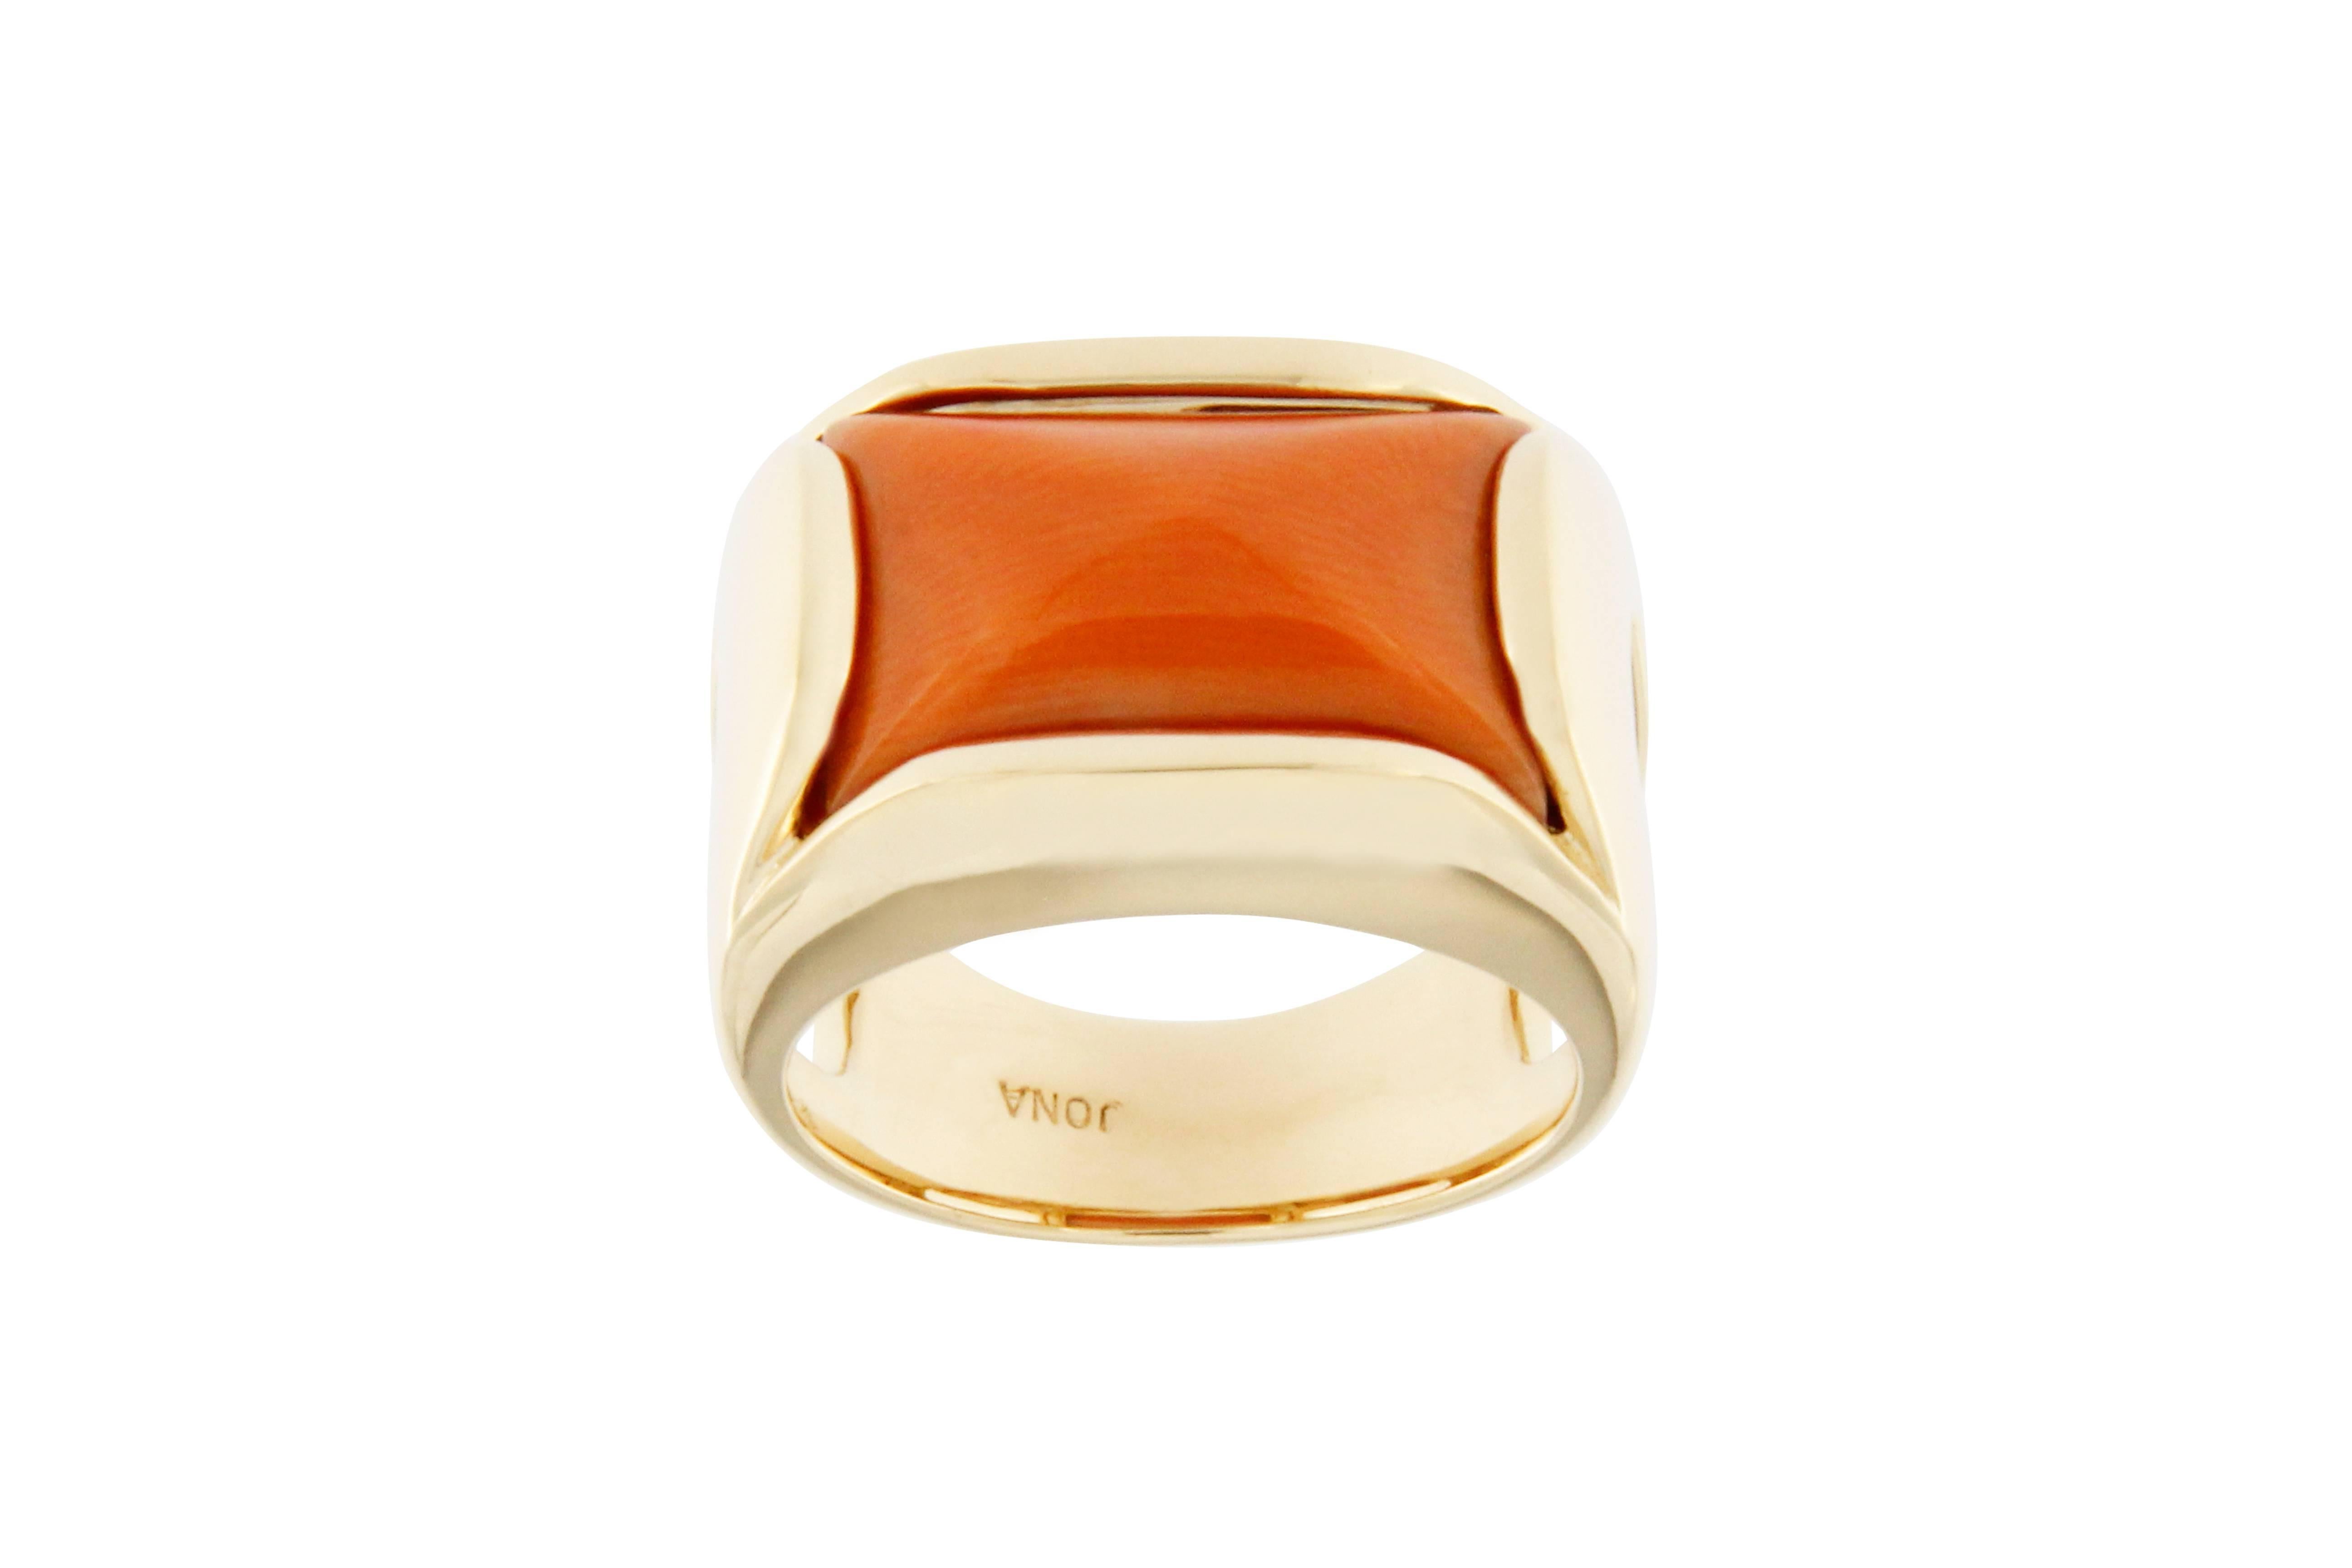 Jona design collection, hand crafted in Italy, 18 carat yellow gold band ring centering a Mediterranean Coral weighing 7.25ct. Dimensions: 0.94 in. H/ 0.80 in. - W/ 0.51 in. -  D/23,87 mm H/ 20 mm W / 12,95 mm D
All Jona jewelry is new and has never